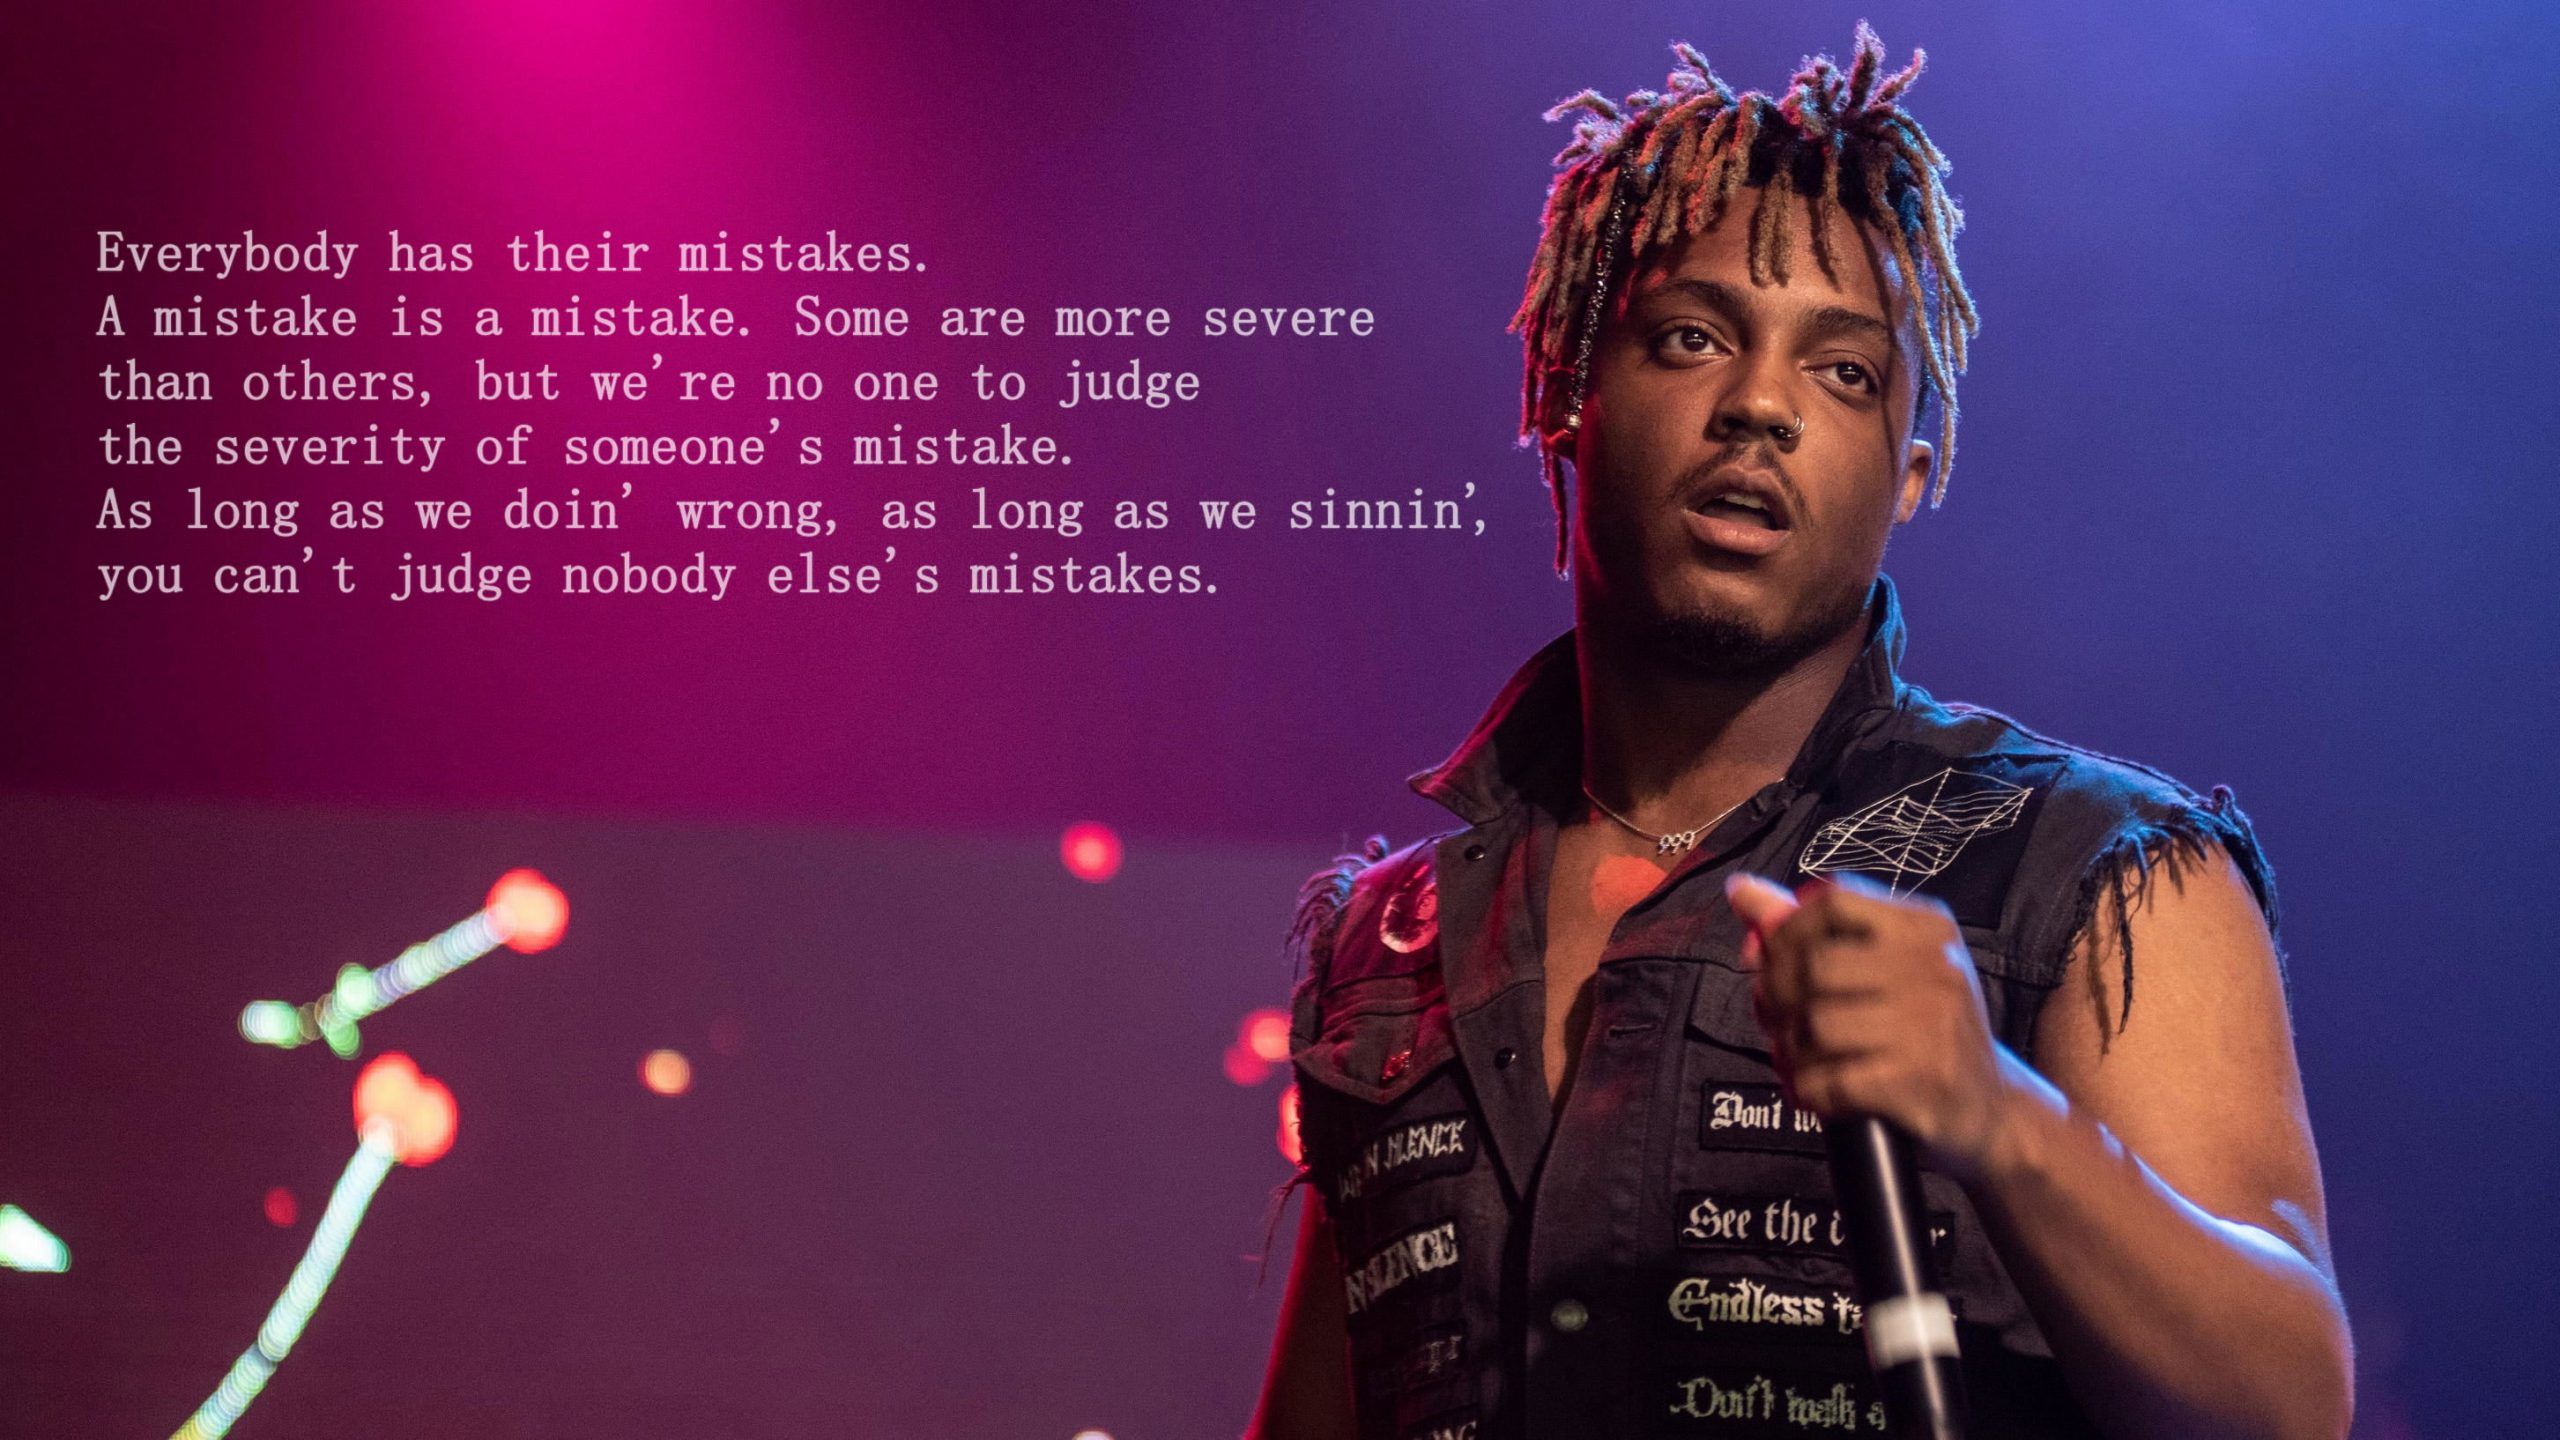 Juice wrld, quote, microphone, Rapper, musician, truth, stage shots • Wallpaper For You HD Wallpaper For Desktop & Mobile